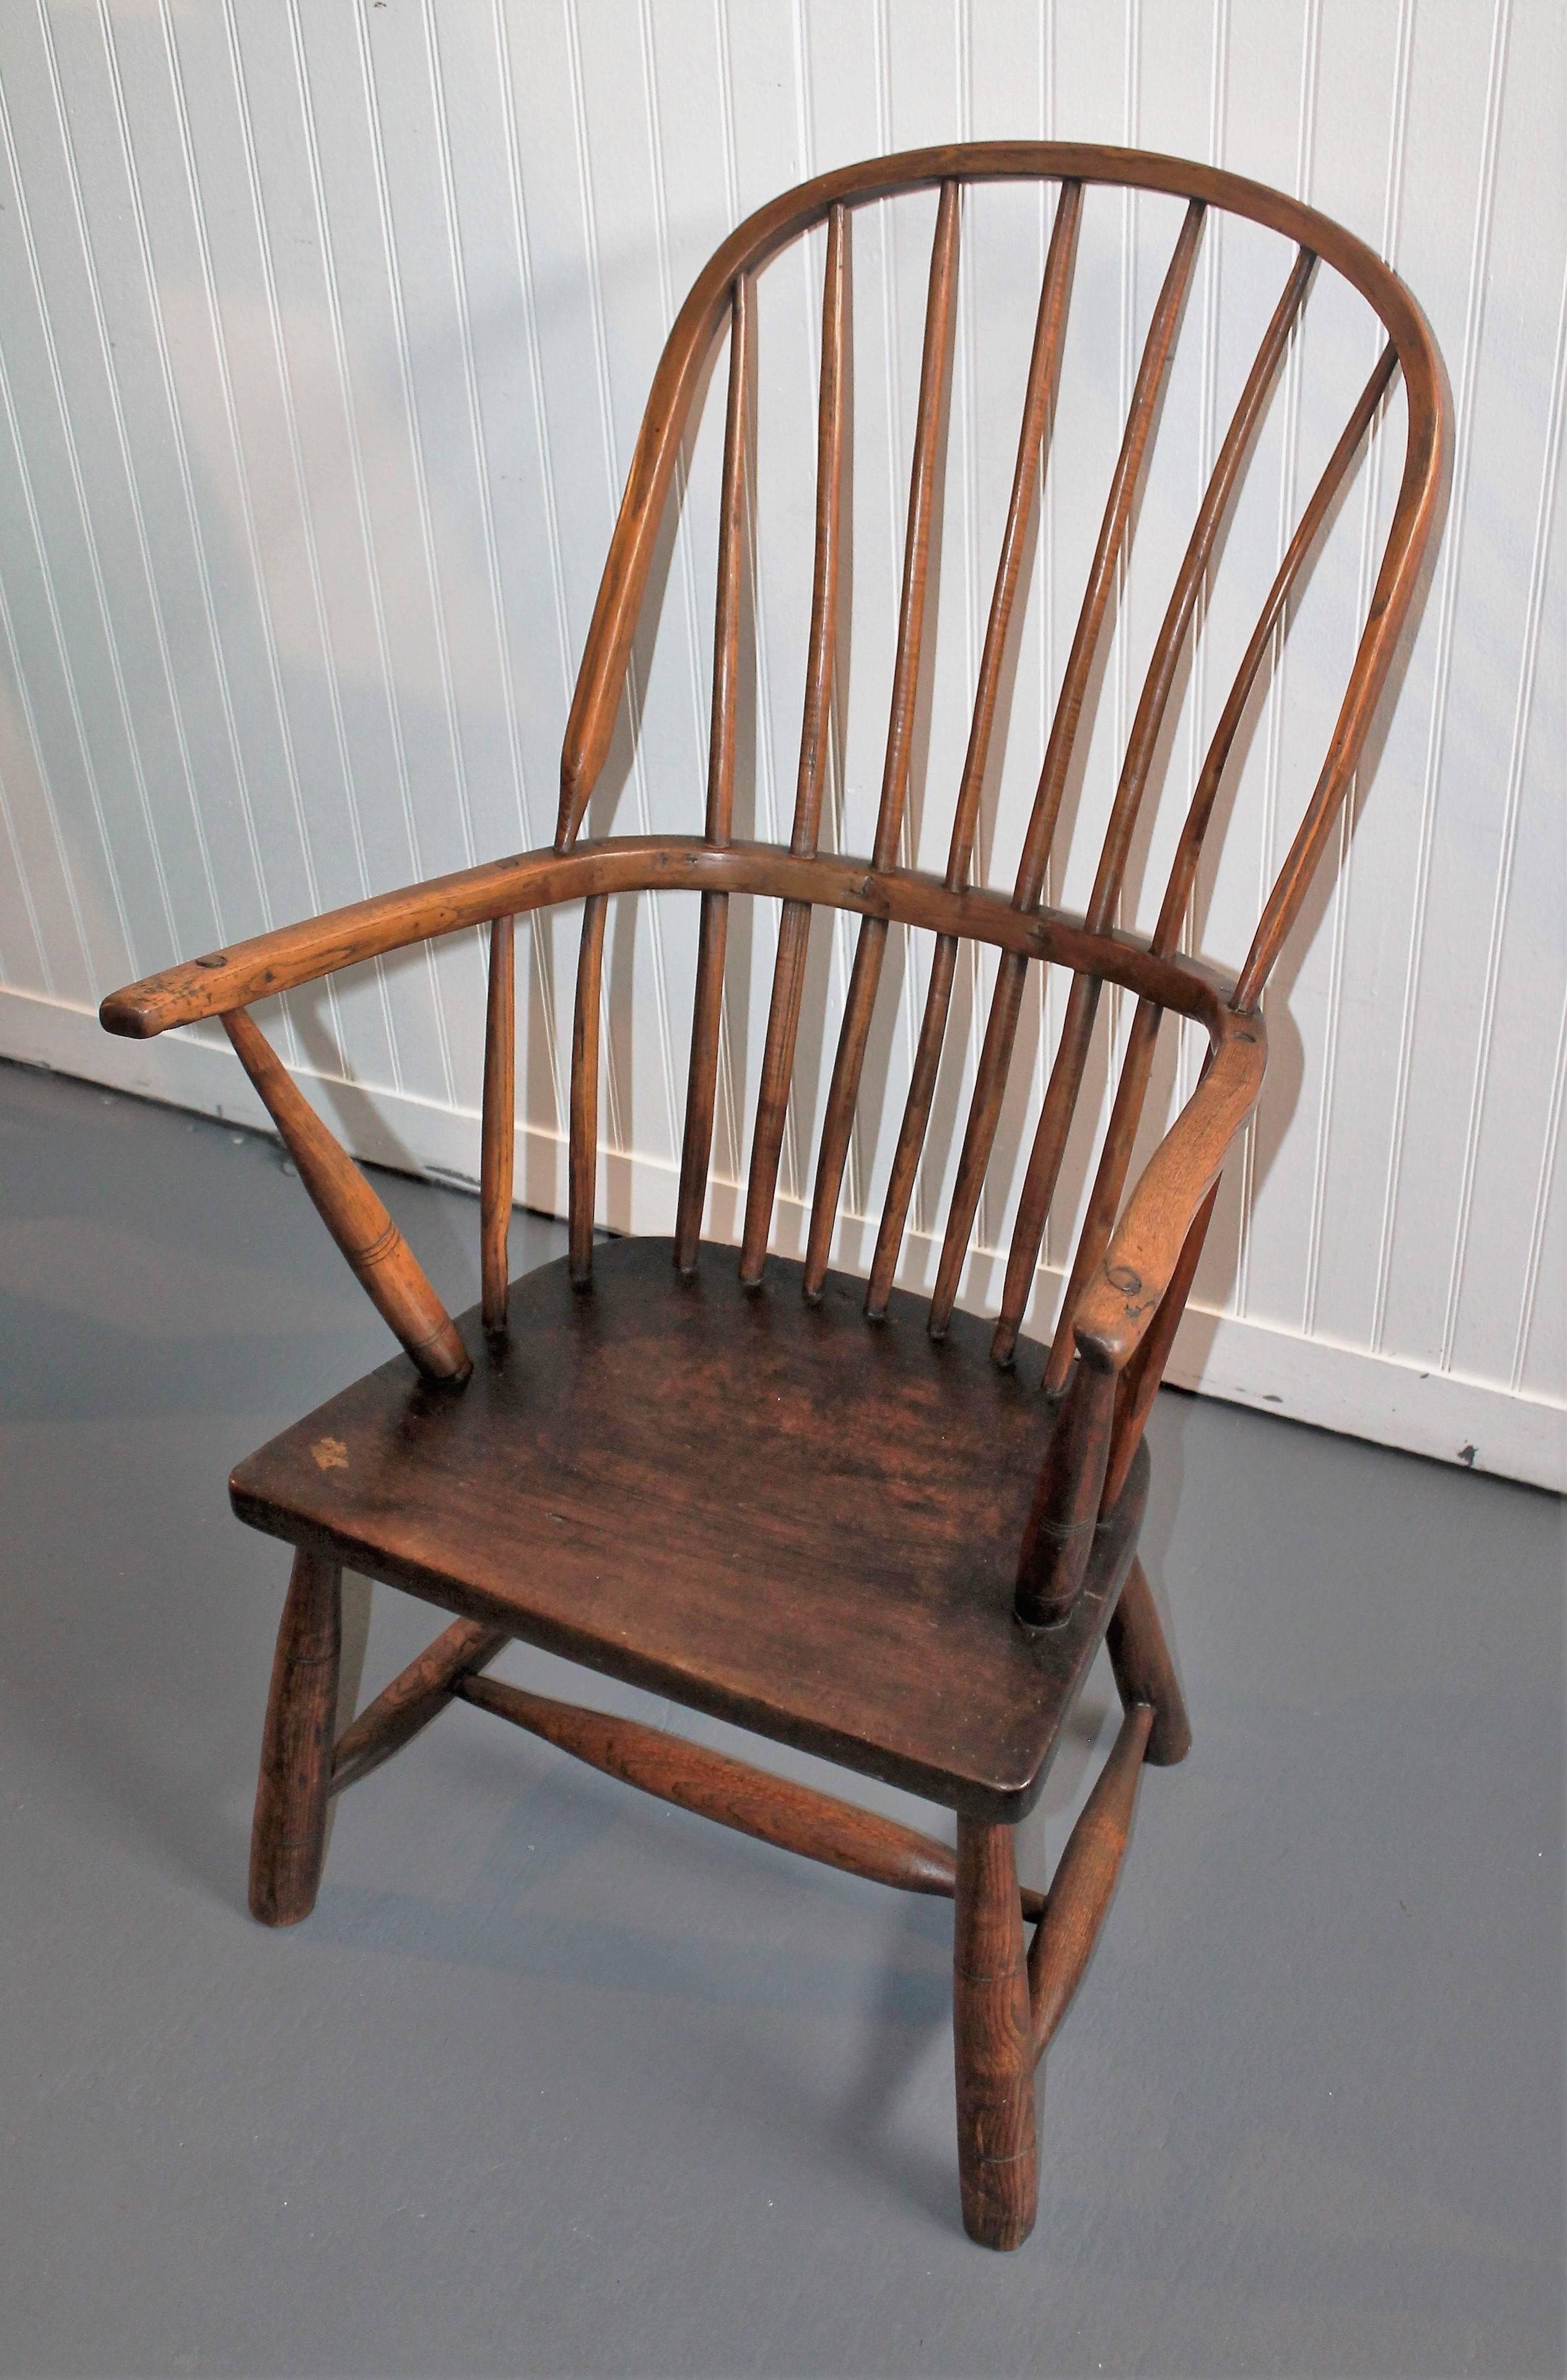 Country Early 19th Century English High Back Windsor Chair